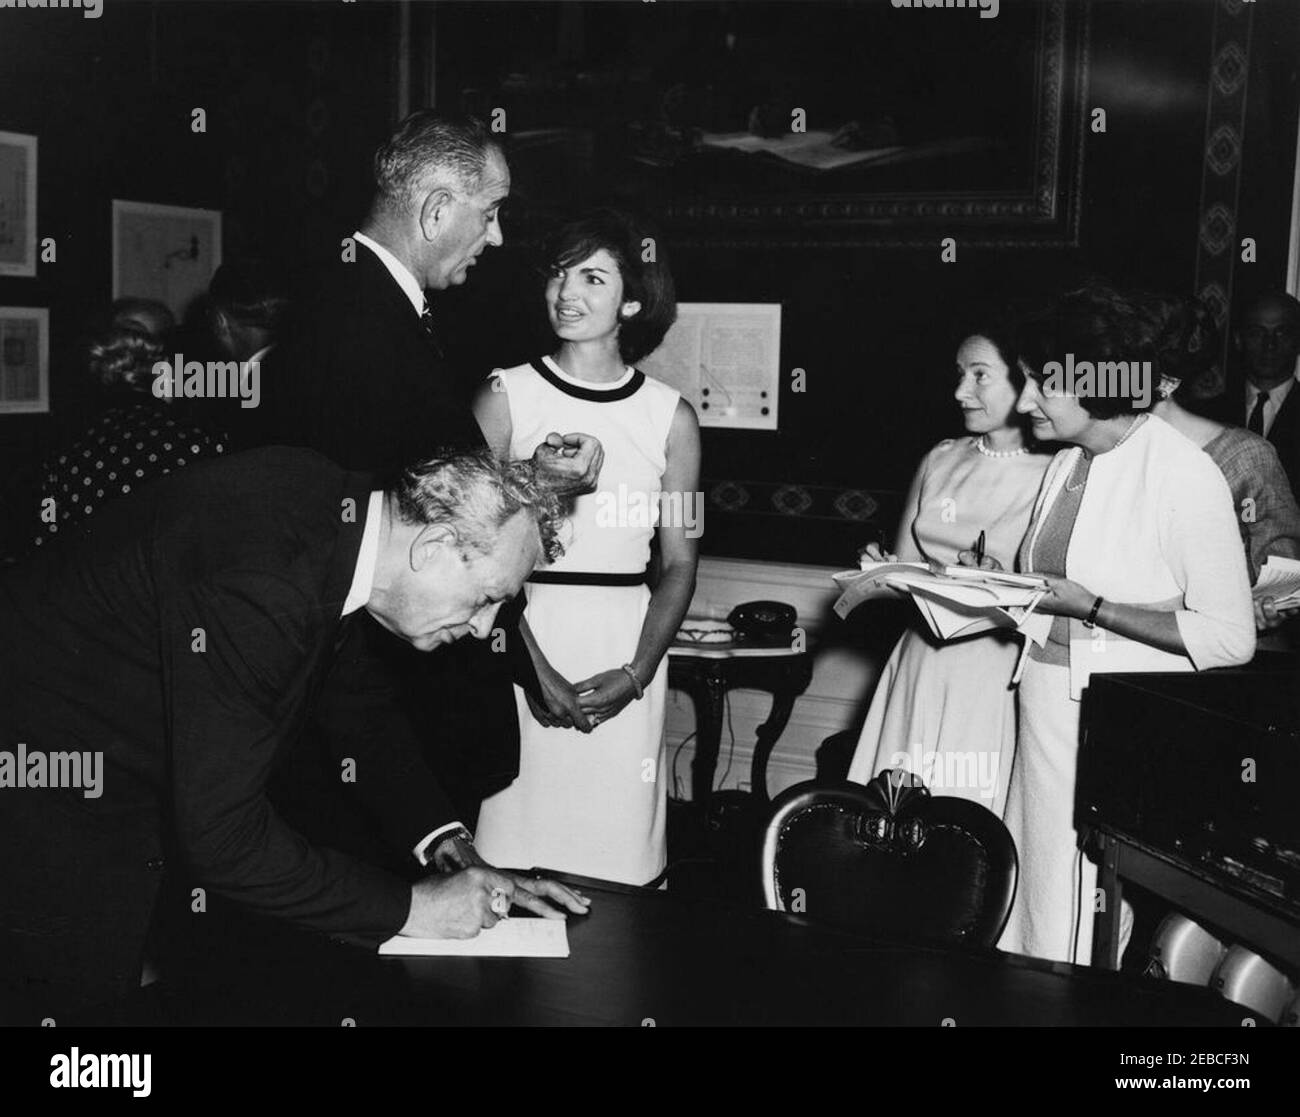 First Lady Jacqueline Kennedy (JBK) opens the refurbished Treaty Room. First Lady Jacqueline Kennedy speaks with Vice President Lyndon B. Johnson at the opening of the newly refurbished Treaty Room (formerly the Monroe Room). Senator Everett Dirksen (Illinois) leans over table at left; White House correspondent for United Press International (UPI), Helen Thomas, stands at right (wearing white jacket). White House Washington, D.C. Stock Photo